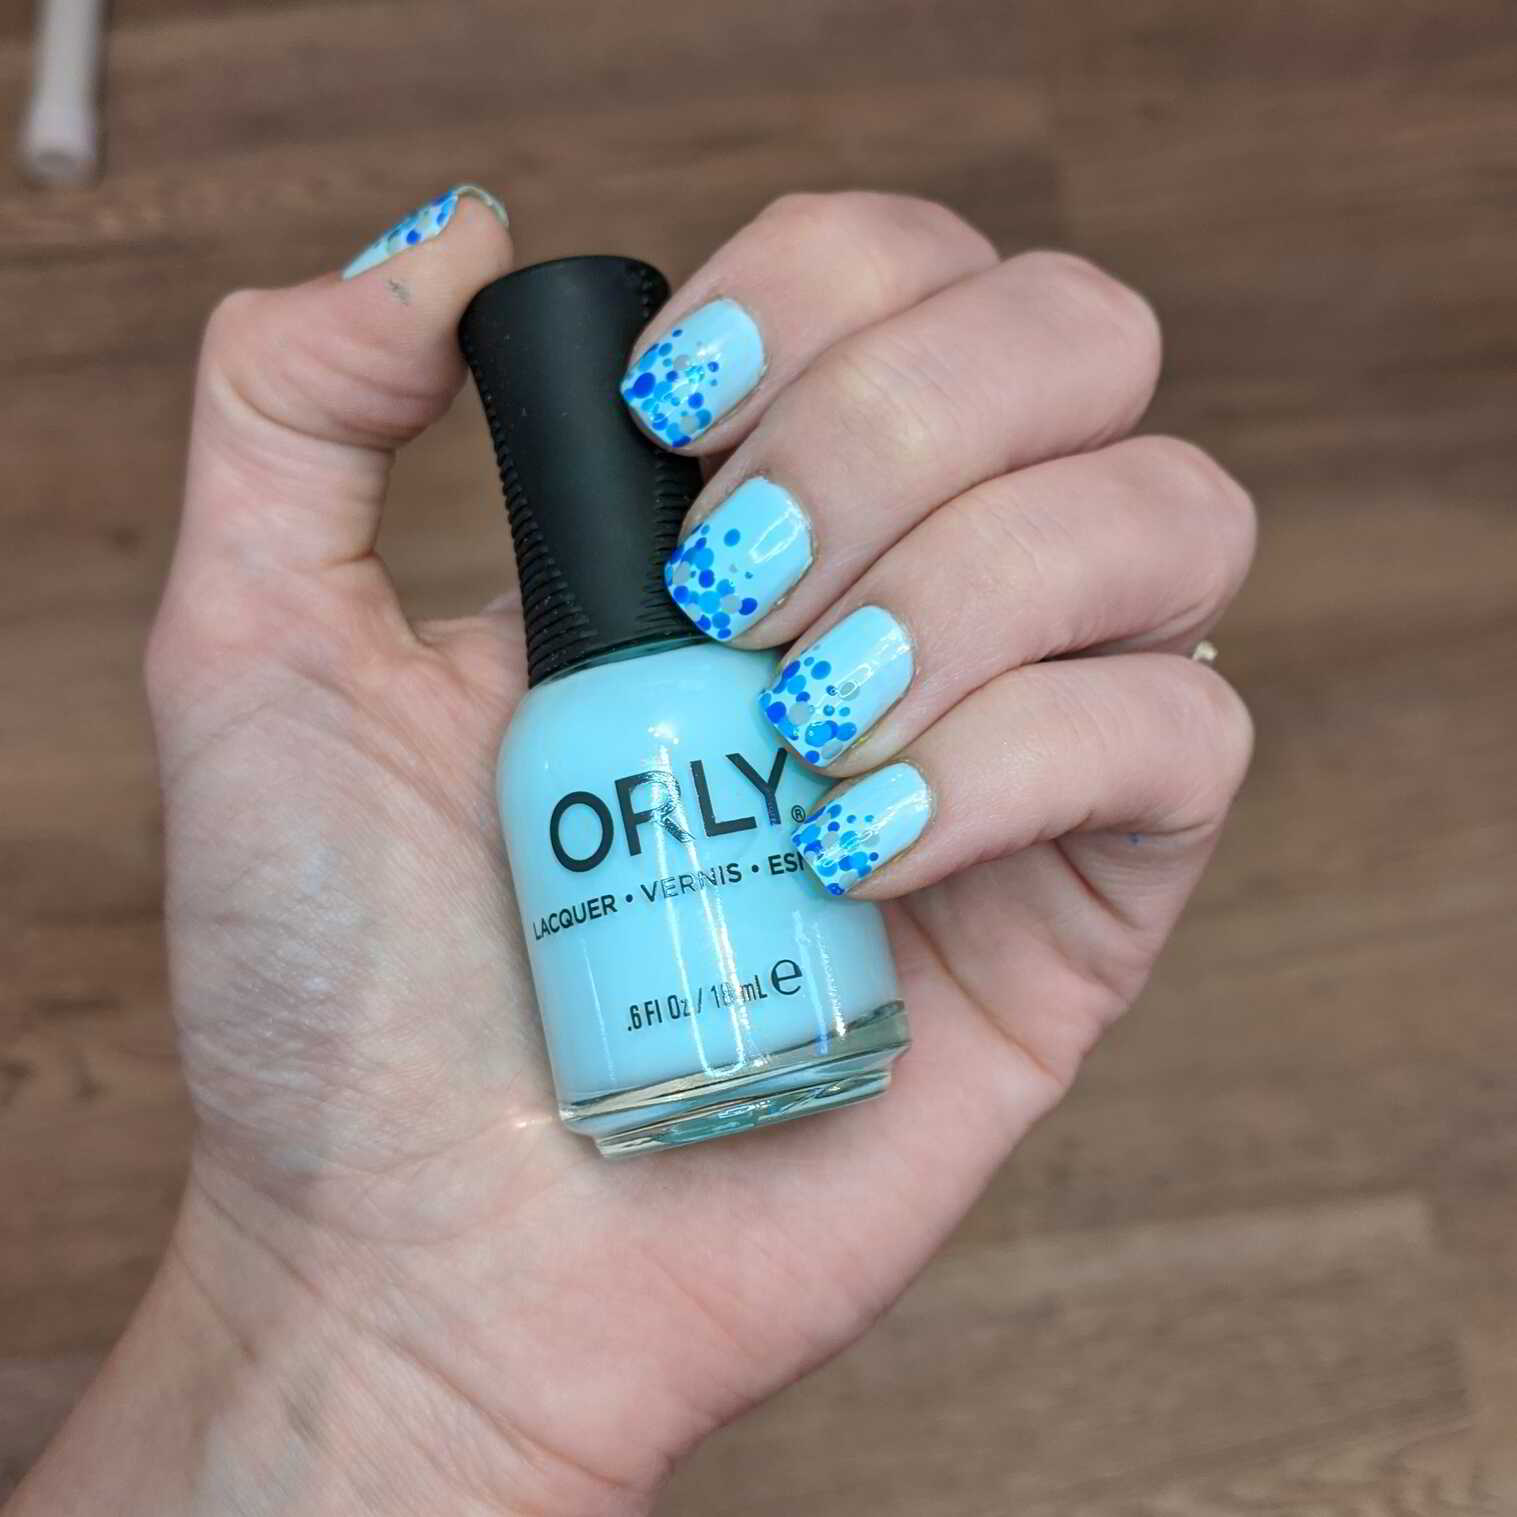 Nail polish manicure of shade Orly Happy camper